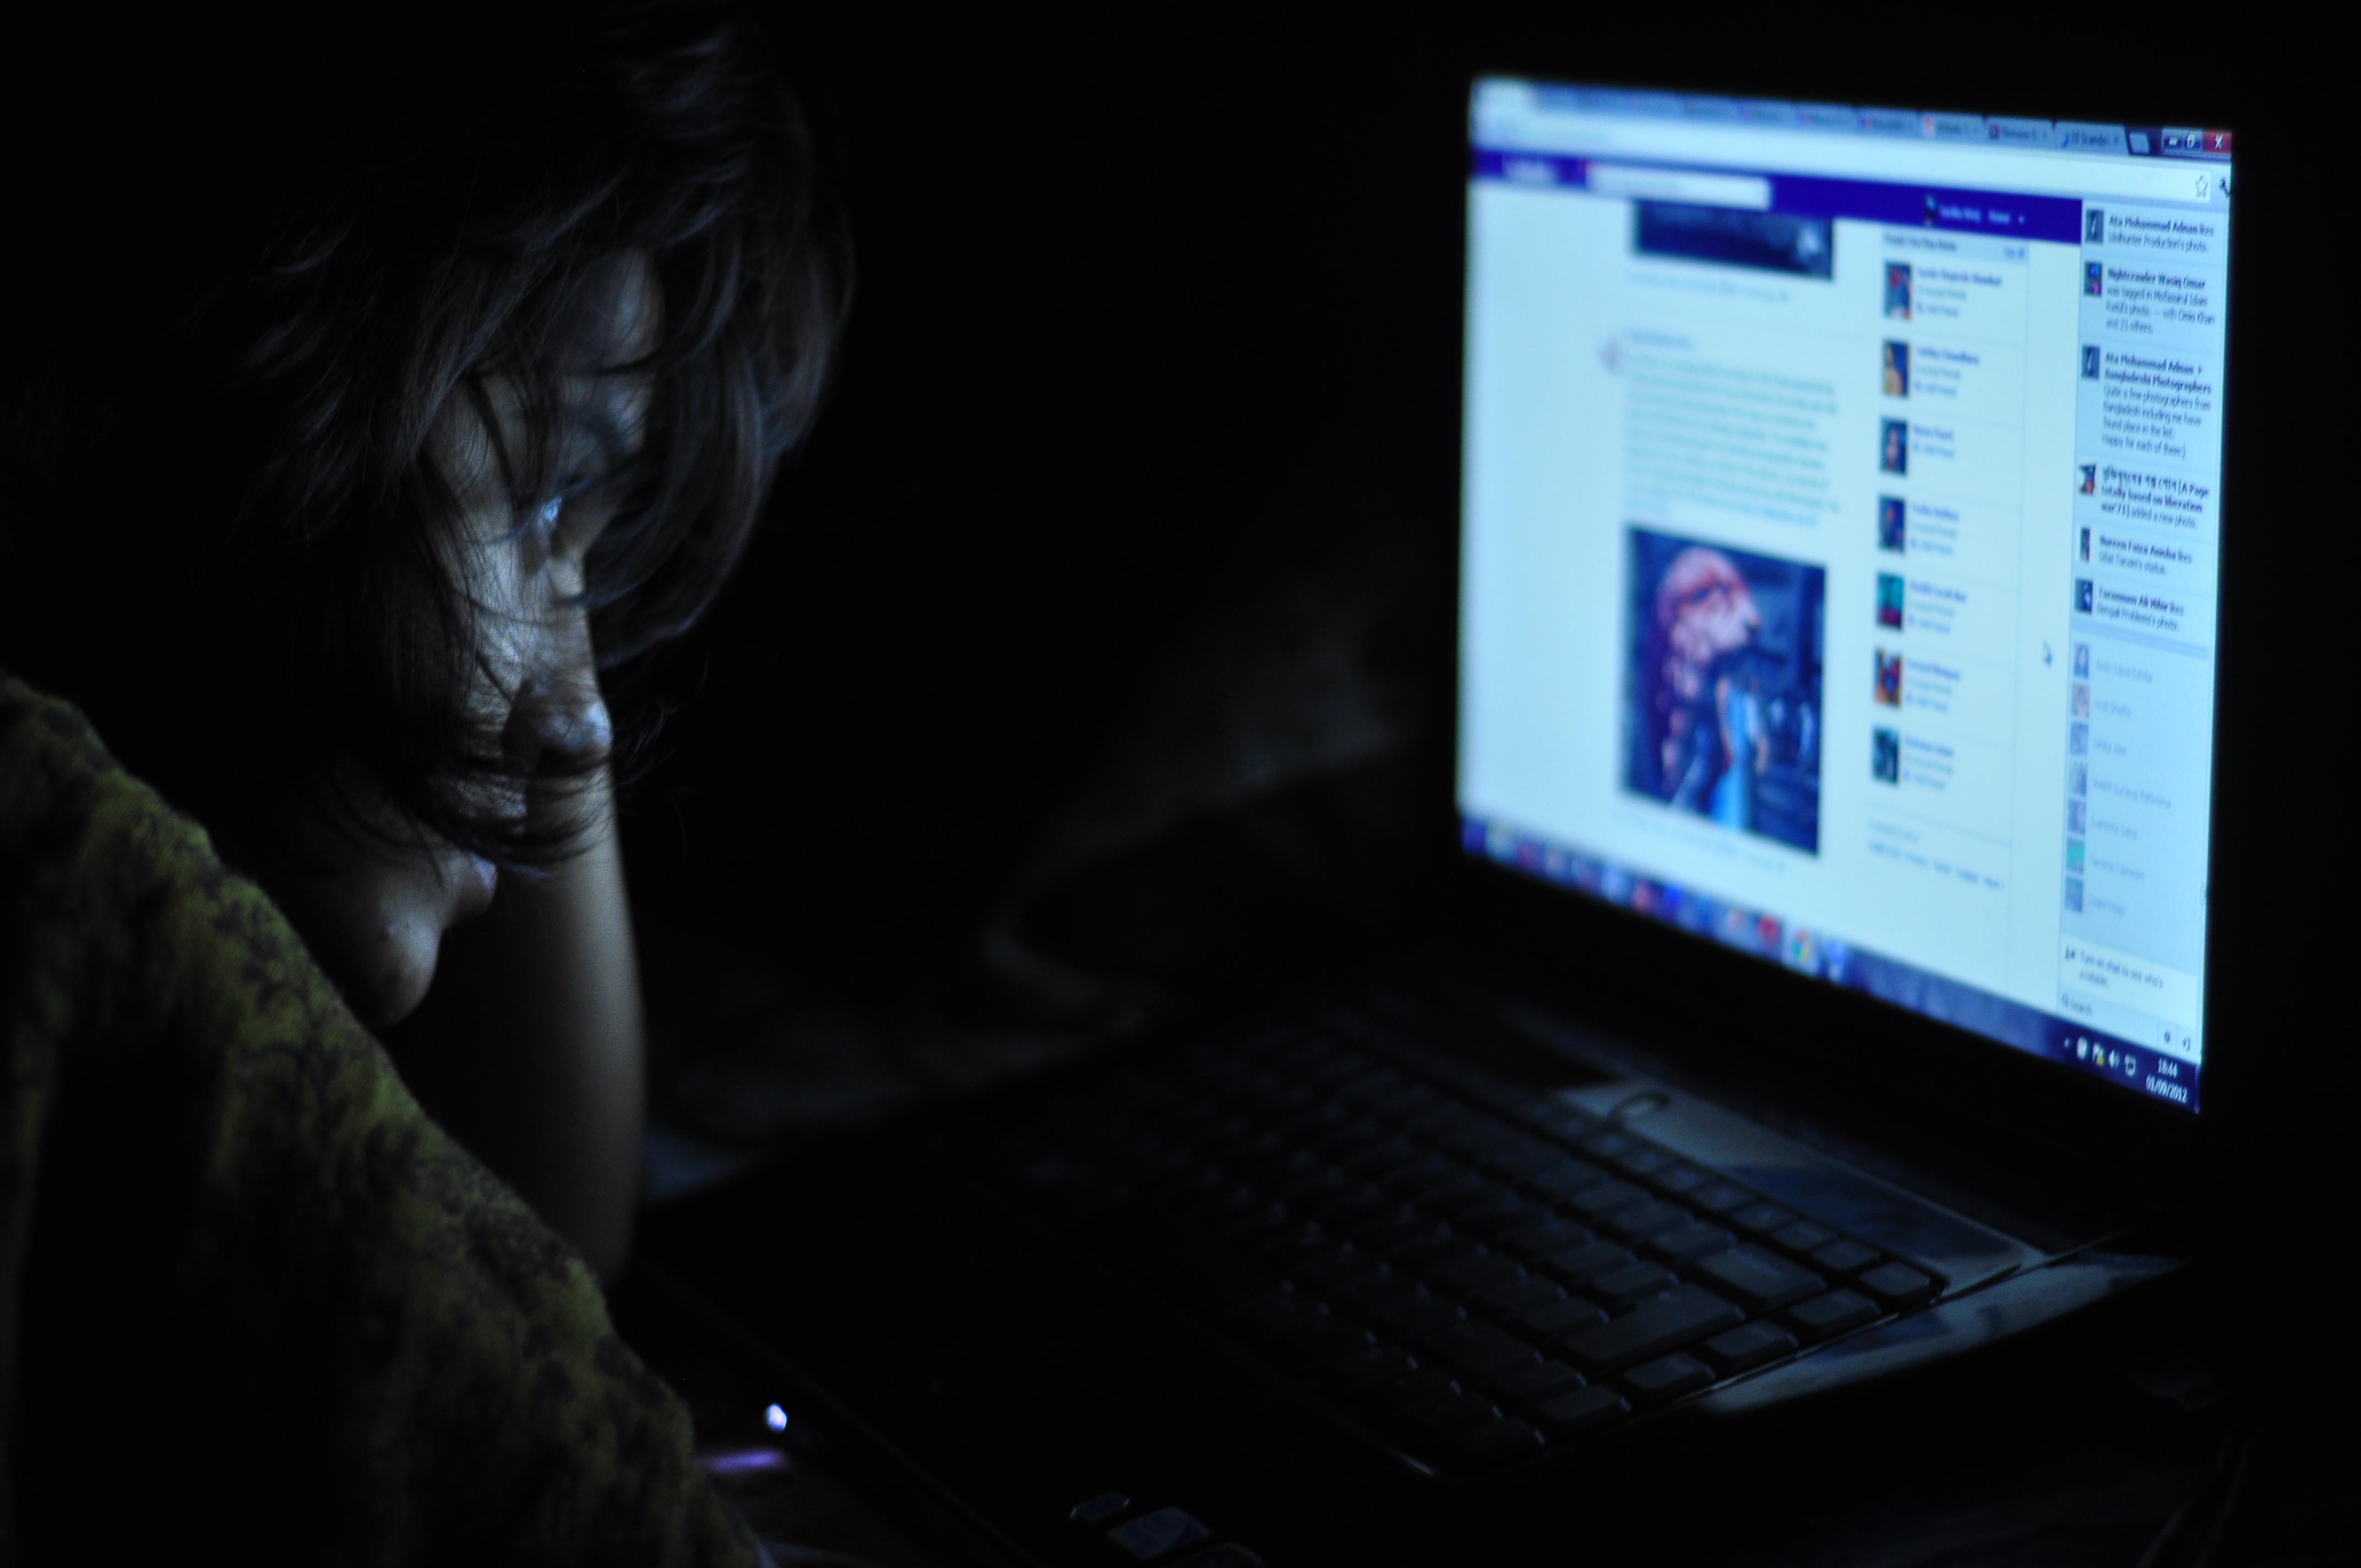 Do You Suffer From The Phenomenon Of Facebook Depression?